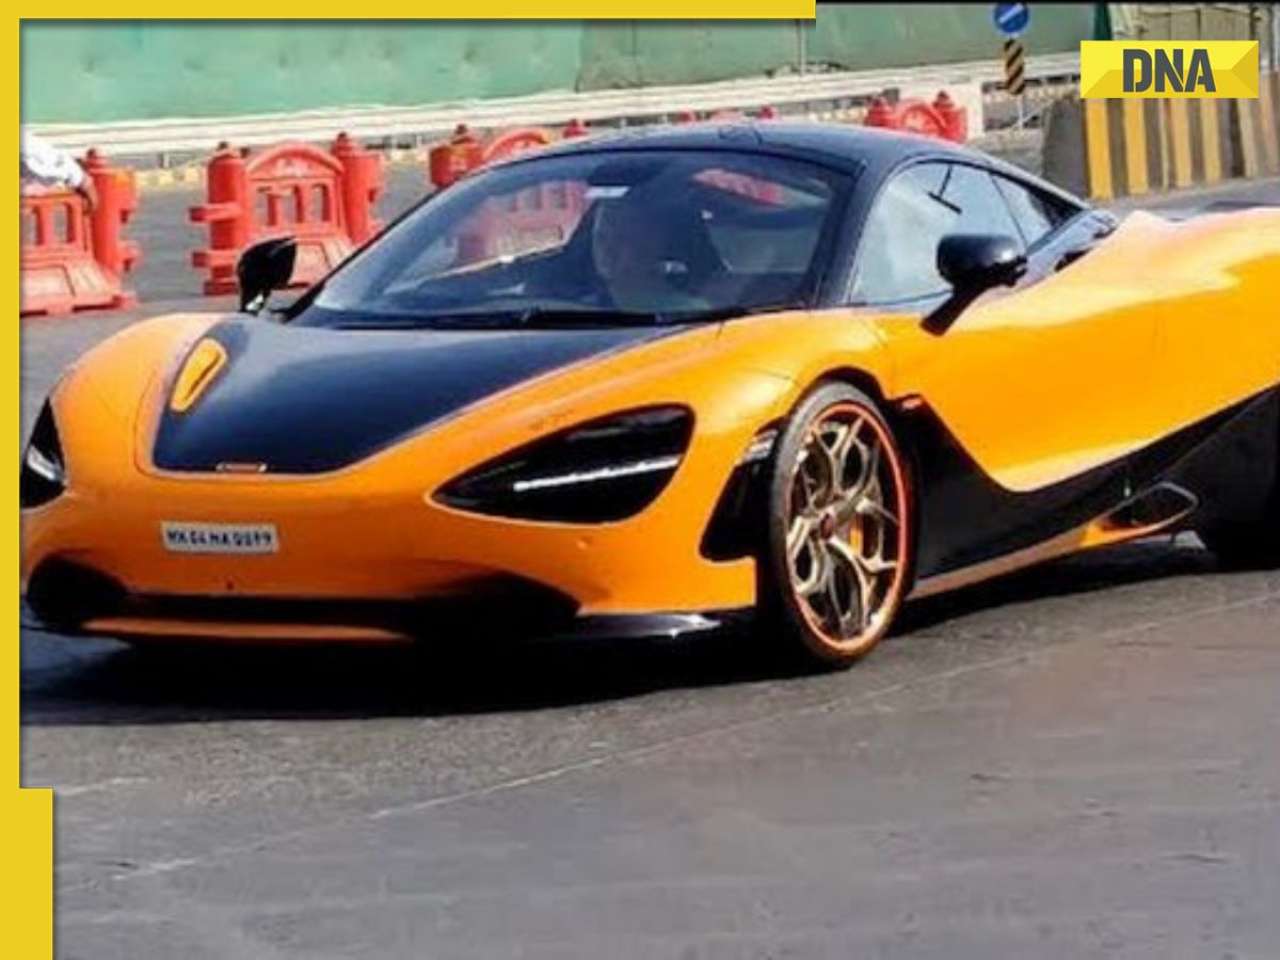 Billionaire Gautam Singhania buys another McLaren supercar, takes Rs 5.91 crore car for a spin